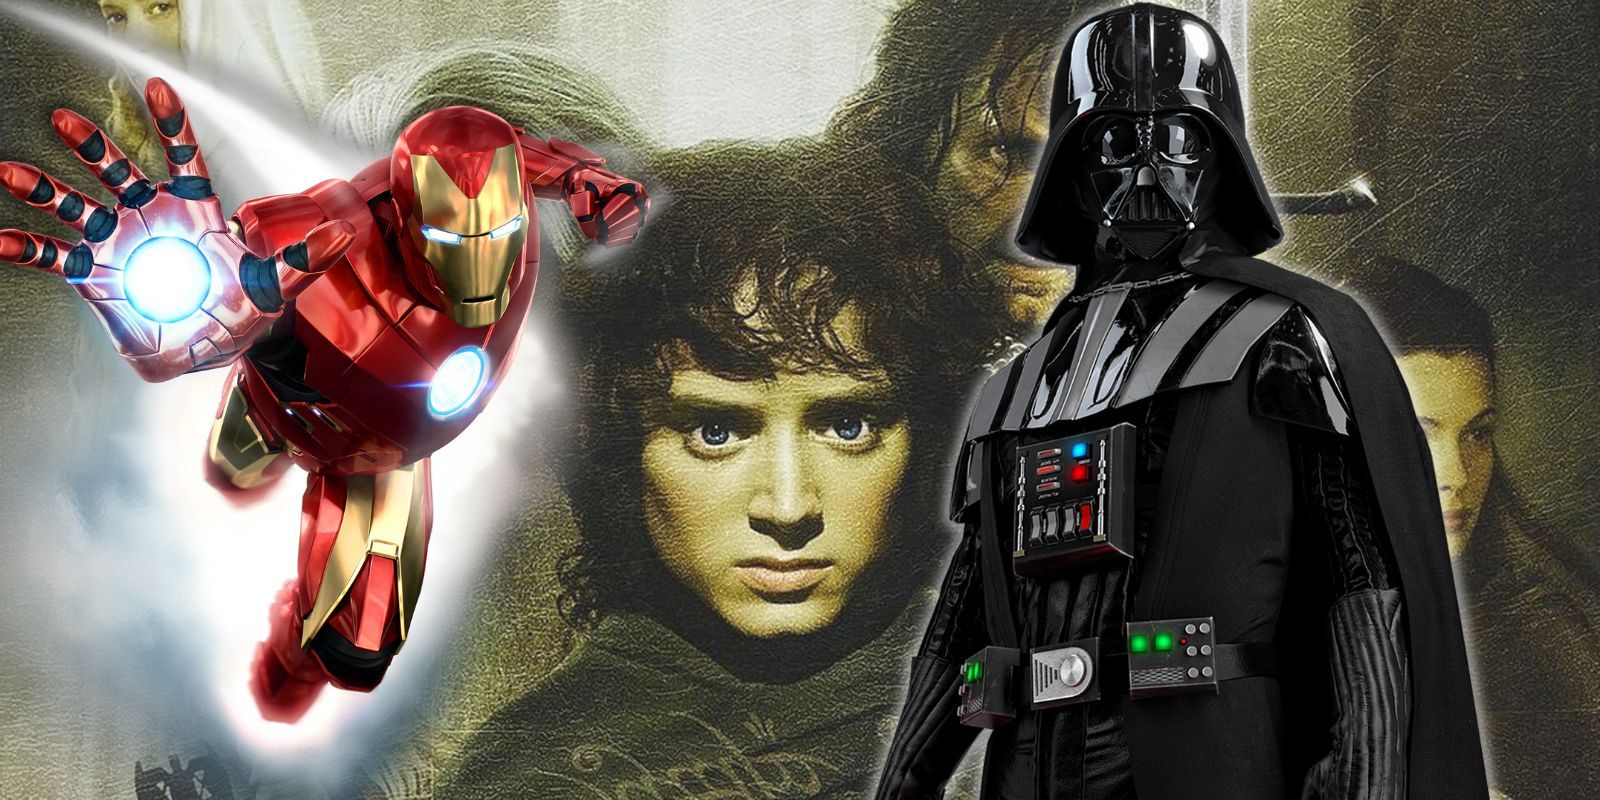 Lord of the Rings' Frodo flanked by Iron Man and Darth Vader